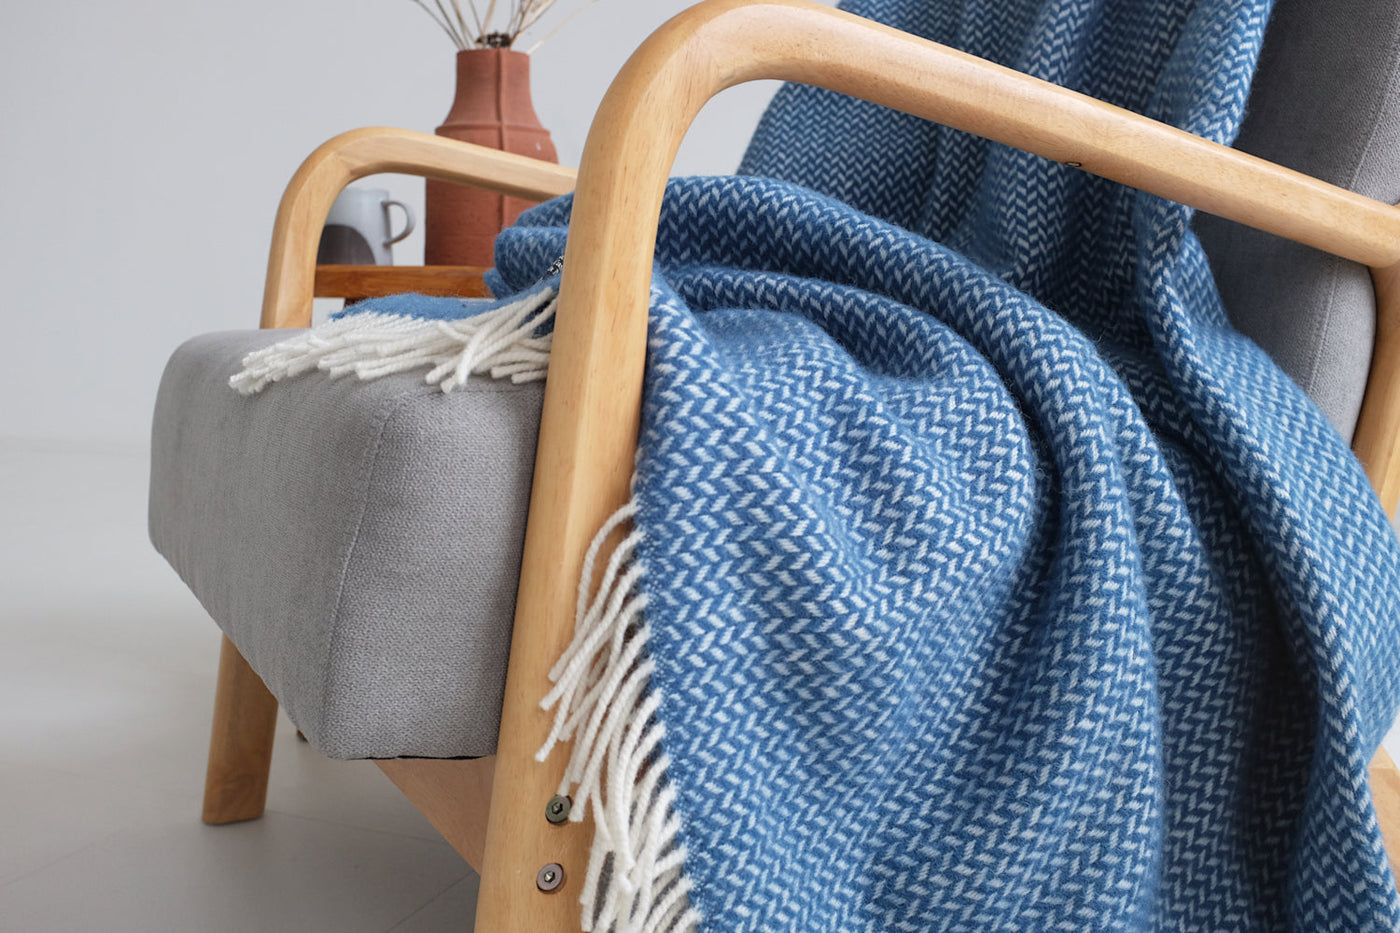 An extra large blue herringbone wool blanket draping off the edge of a lounge chair